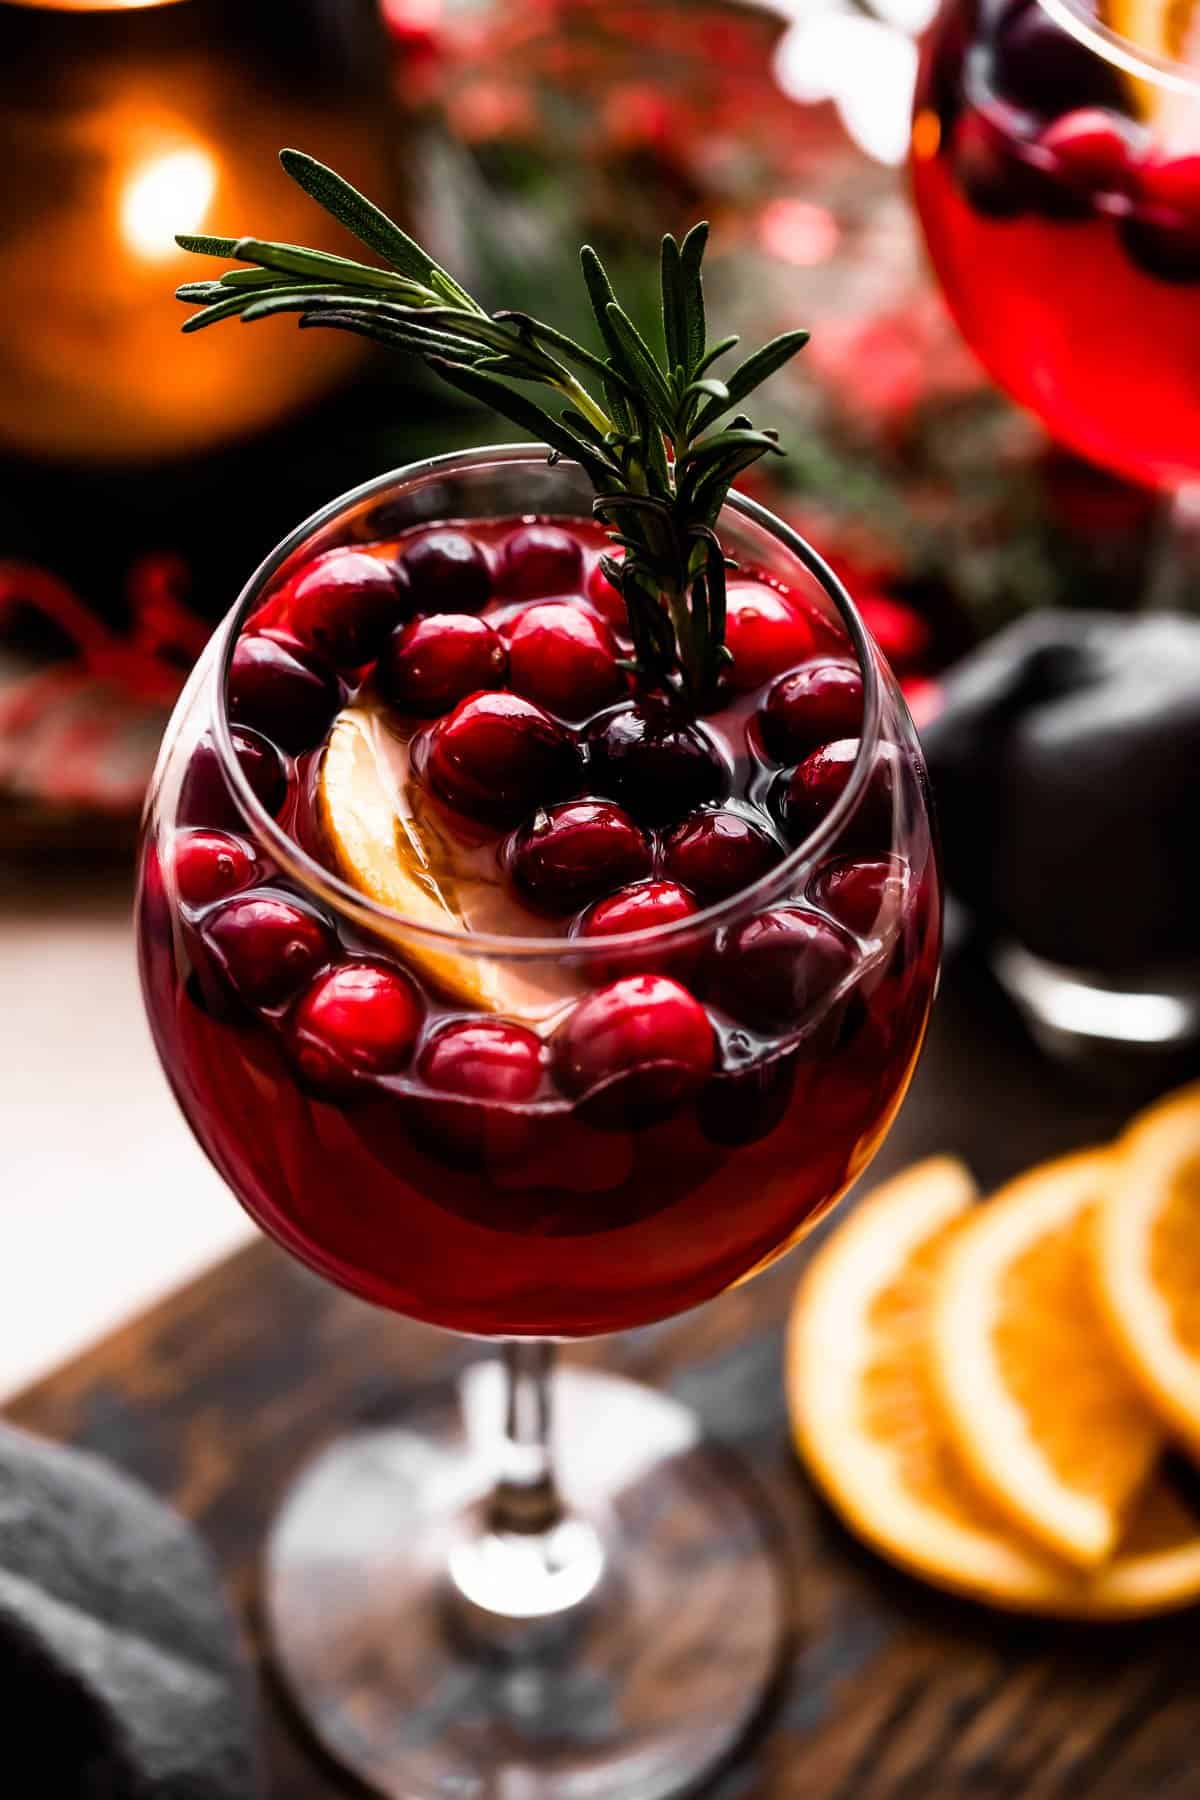 tall stemmed glass set on a wooden board and filled with wine, cranberries, orange slices, and rosemary sprigs.